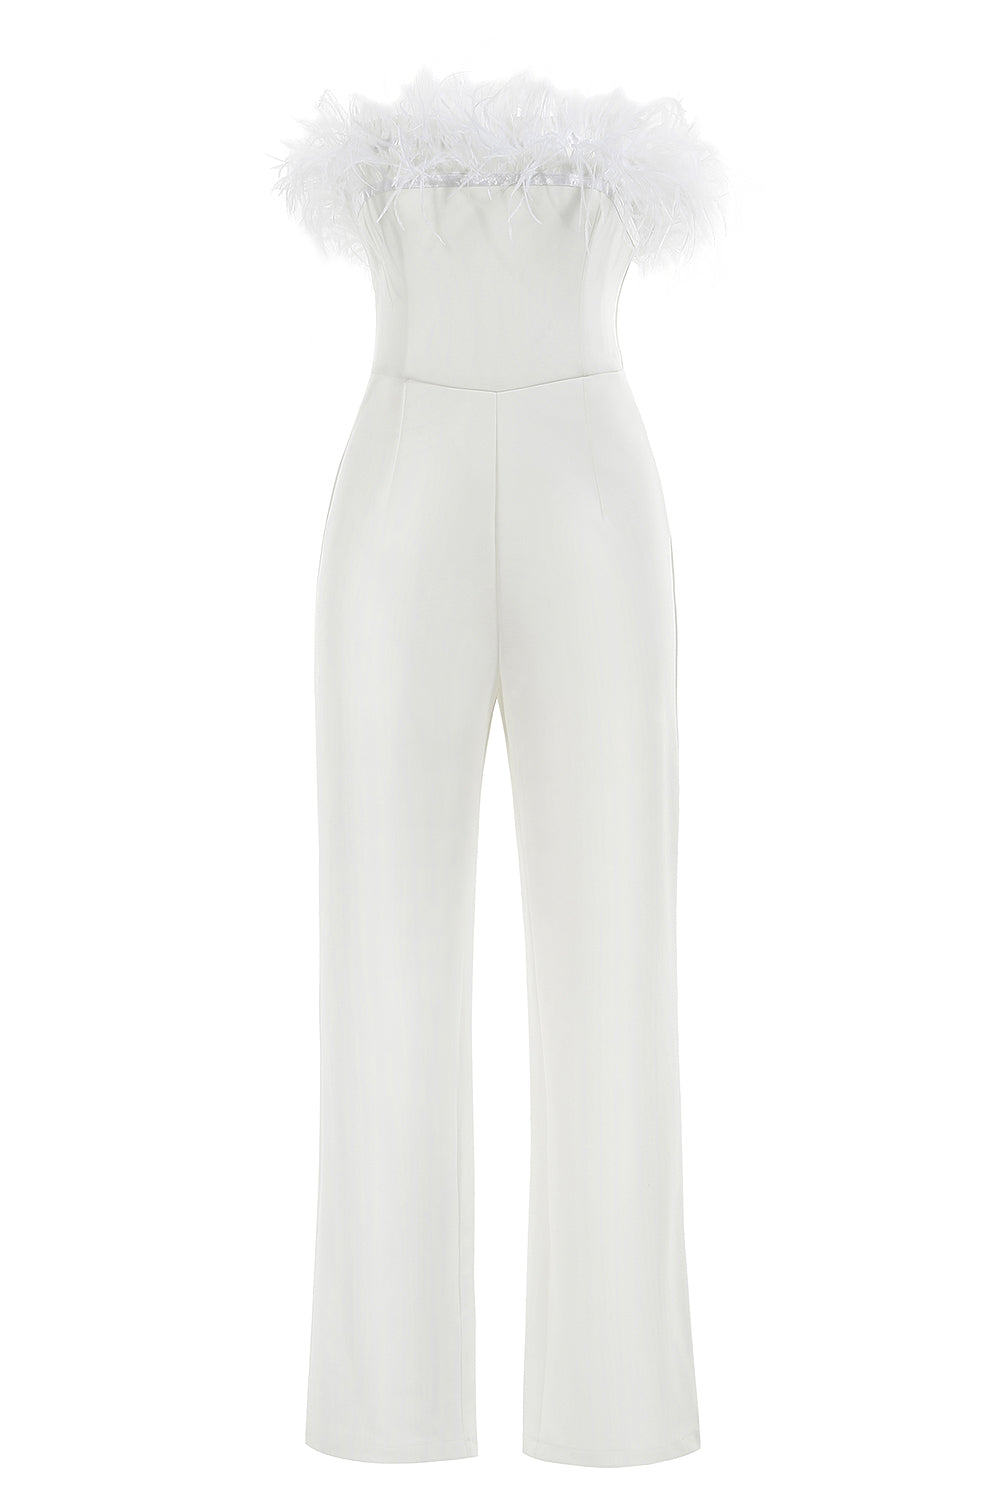 White Feathers Jumpsuits Off Shoulder Full Pants - Chicida